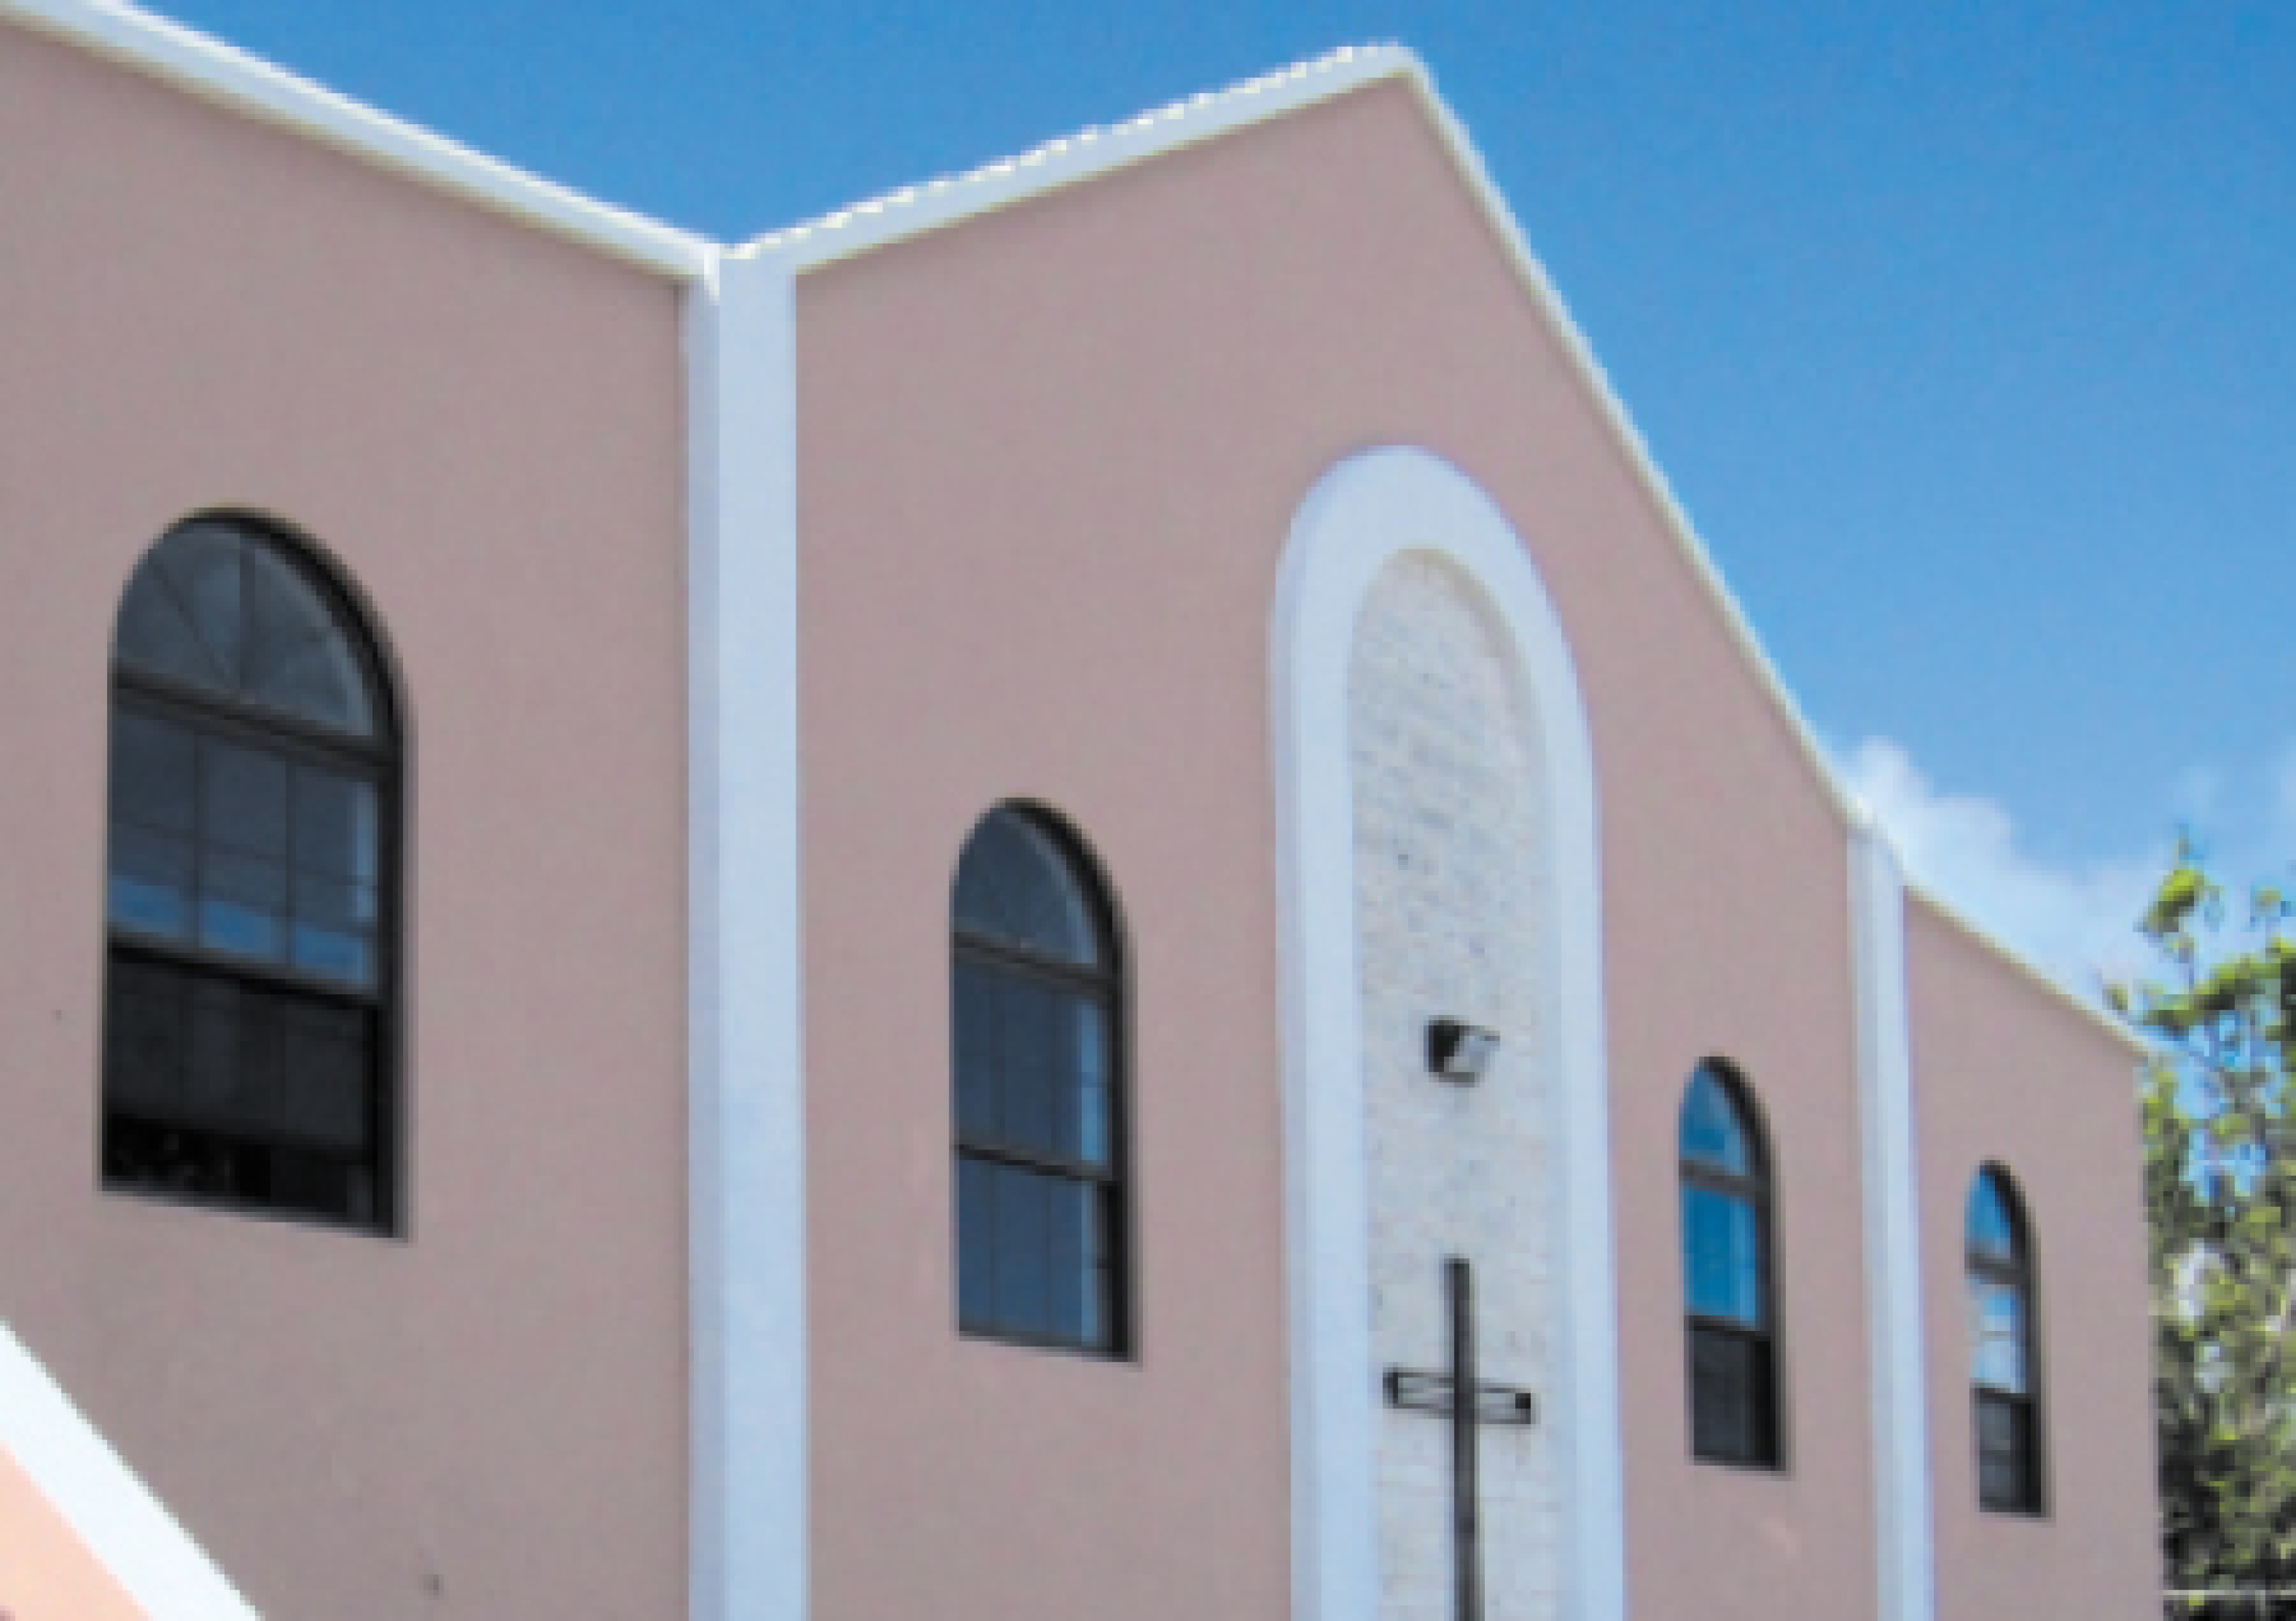 First Church Of God (Soundview)